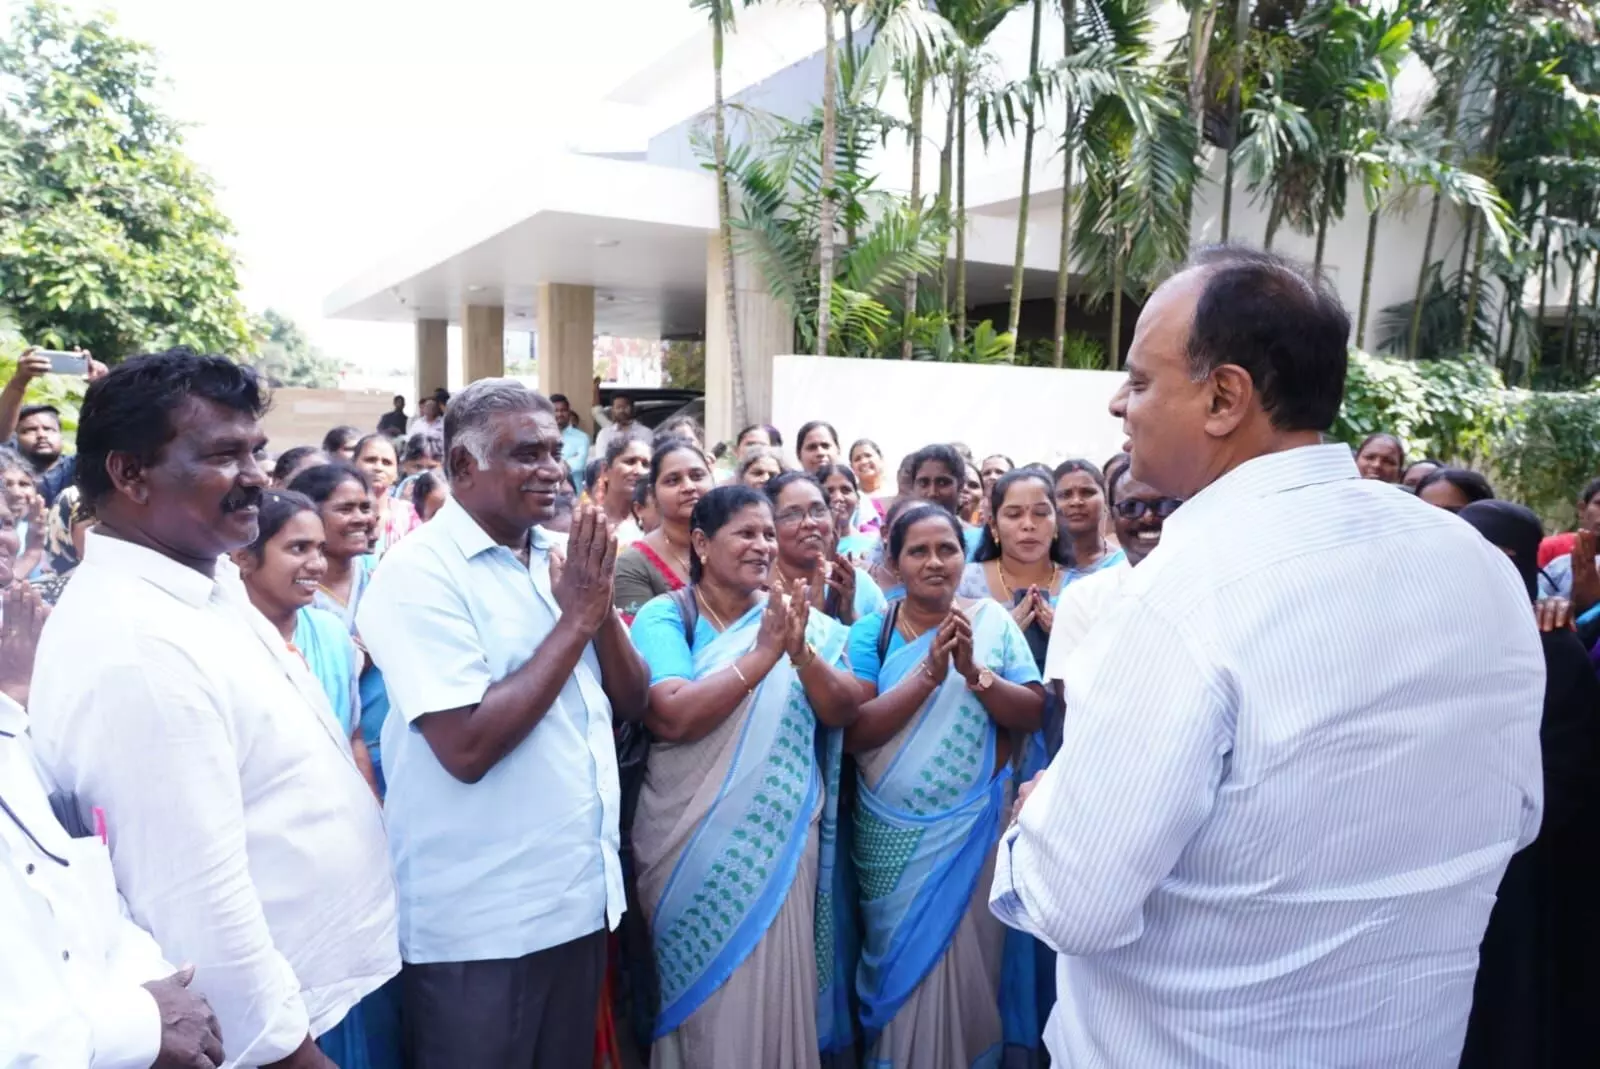 Nellore YSRCP MP candidate meets Anganwadi workers, says will take their demands to CM